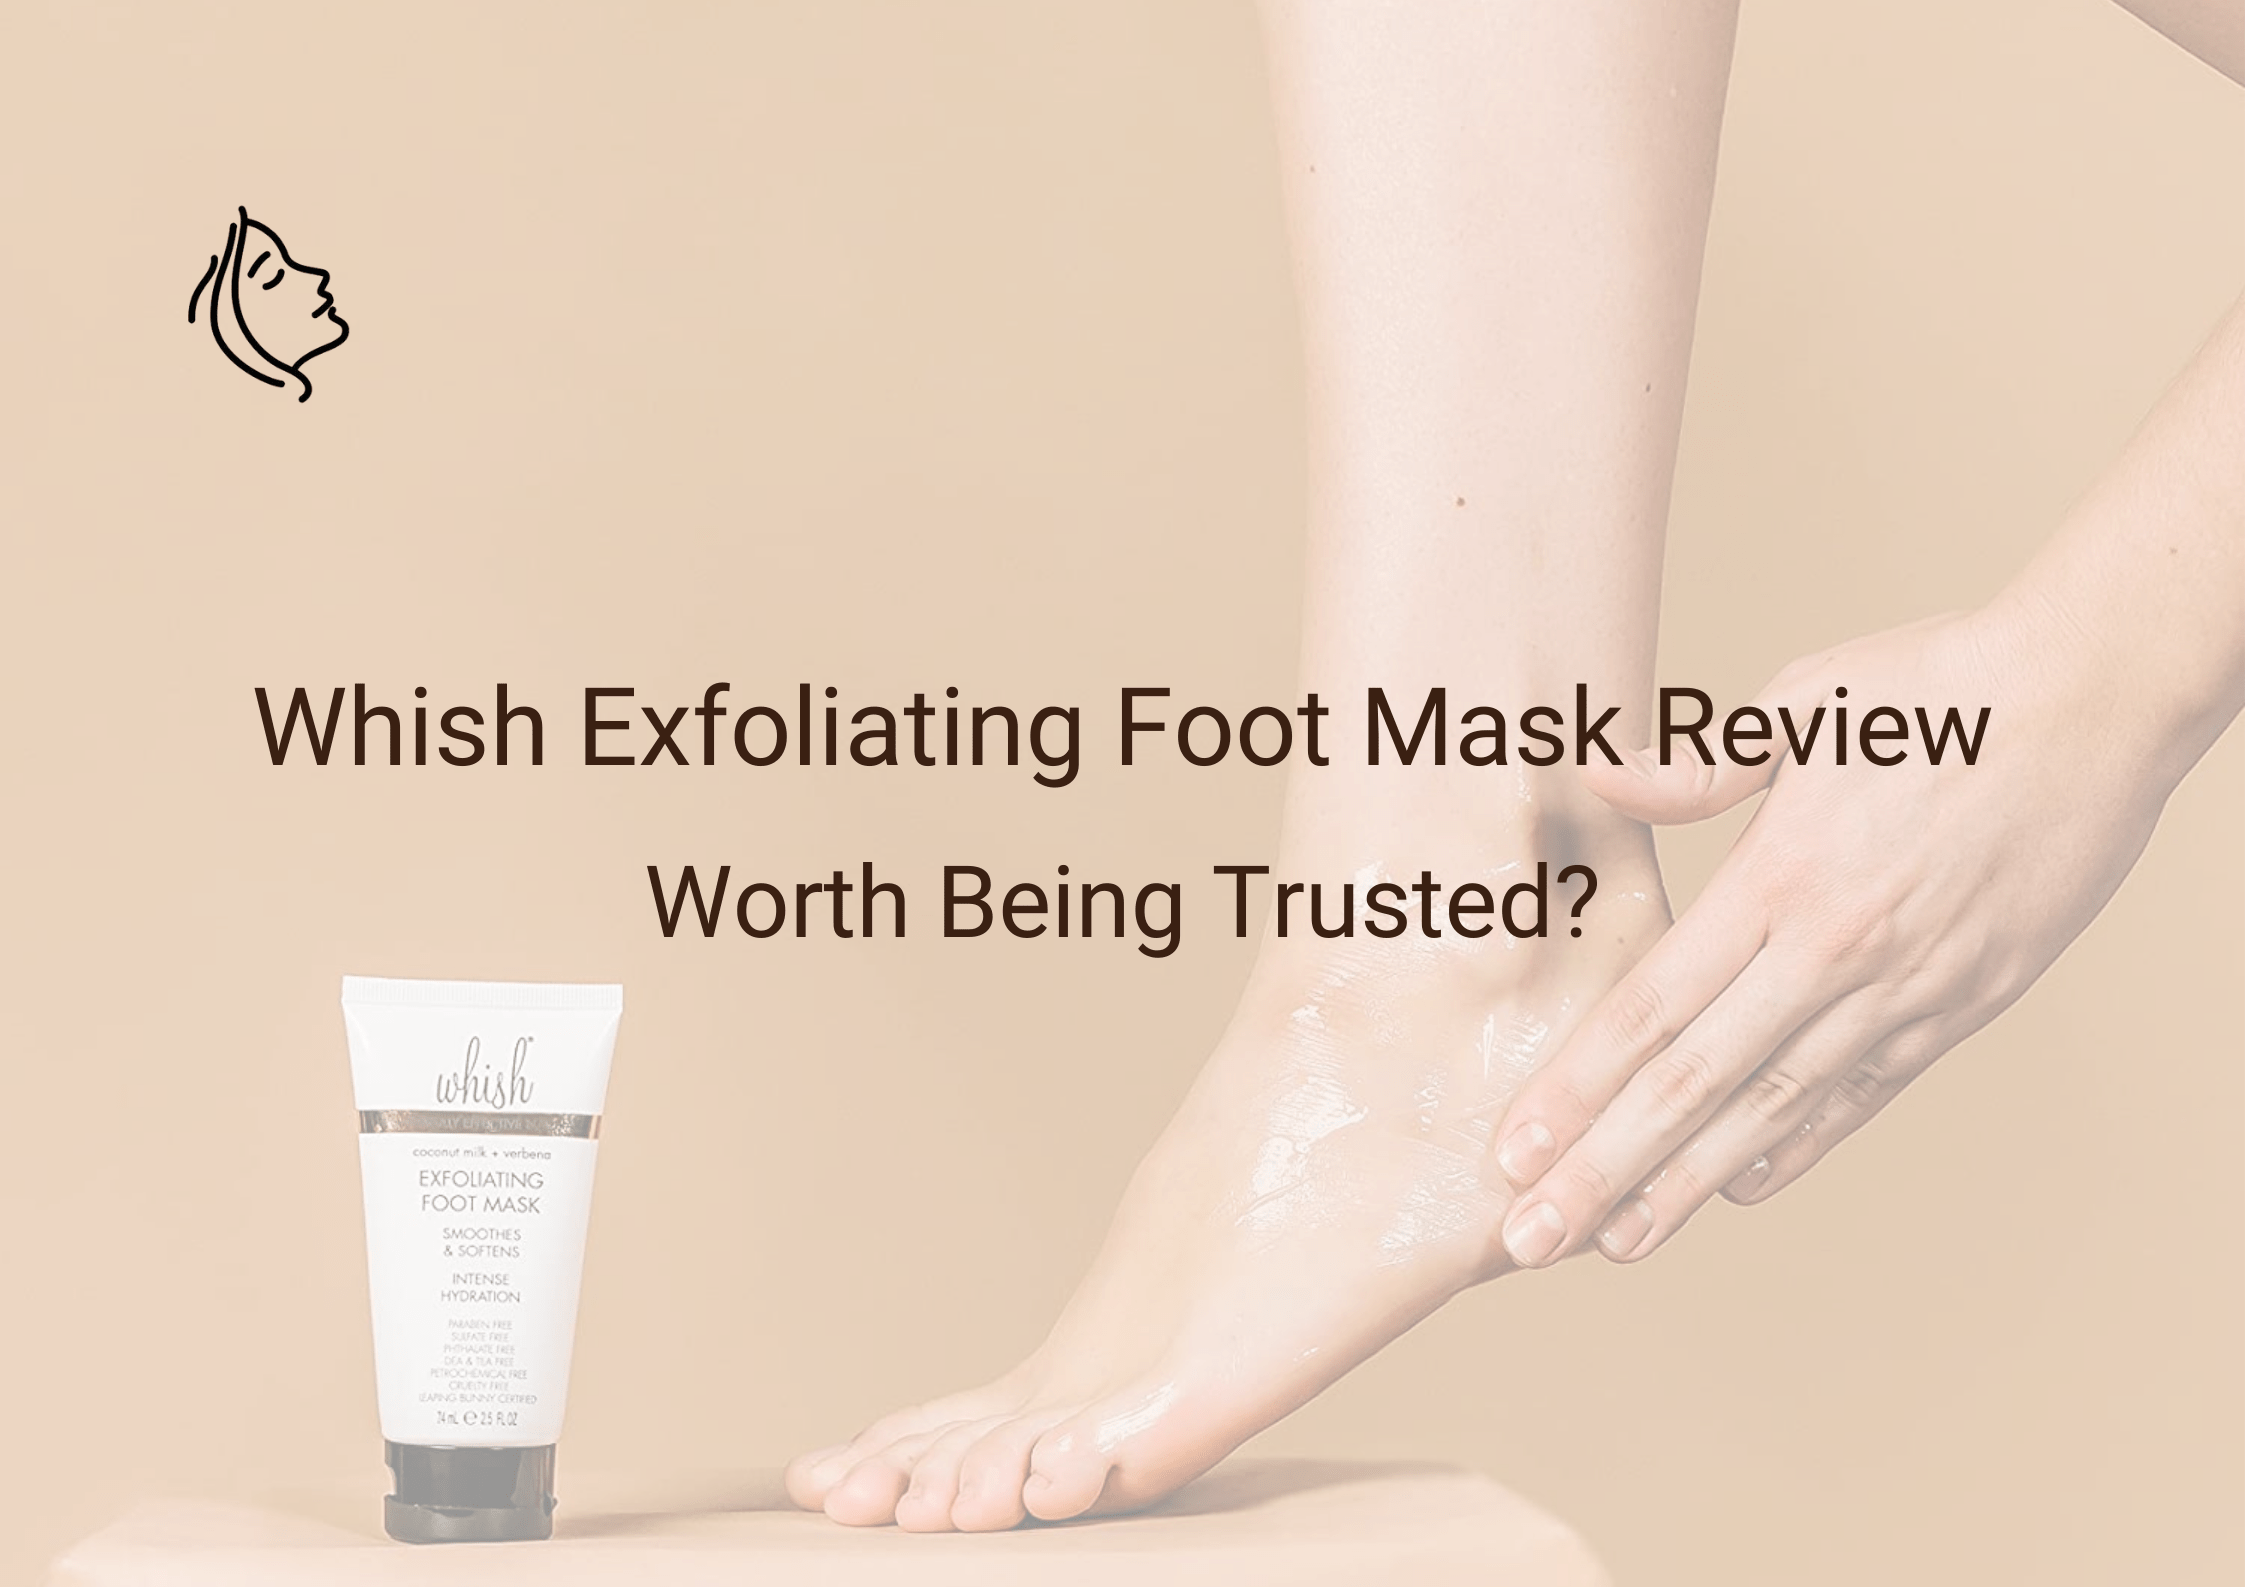 Whish Exfoliating Foot Mask Review